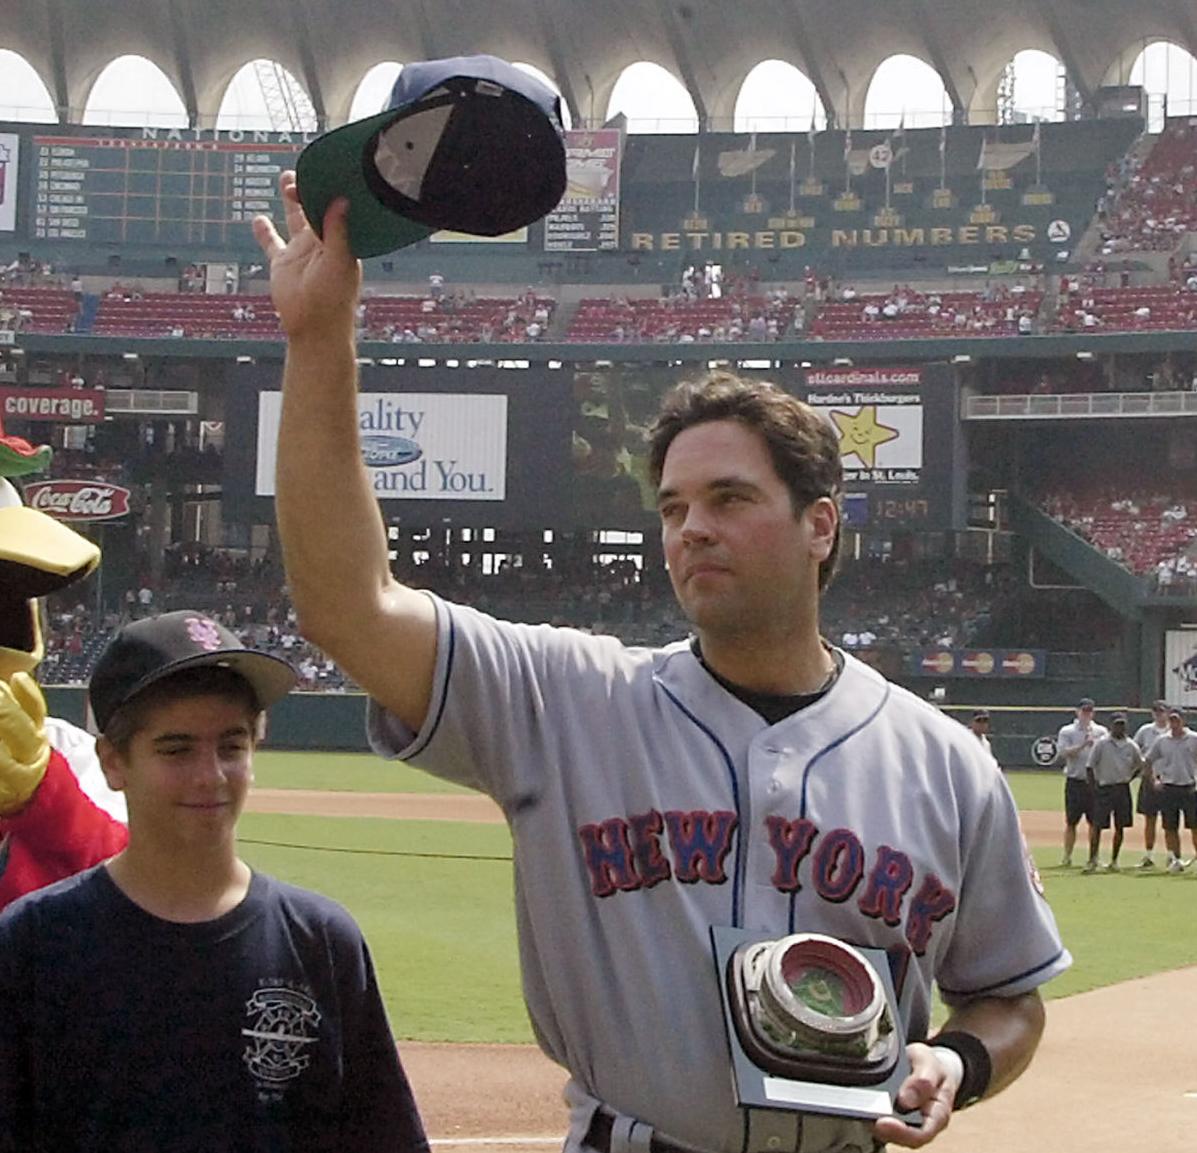 Mike Piazza to have his Number Retired